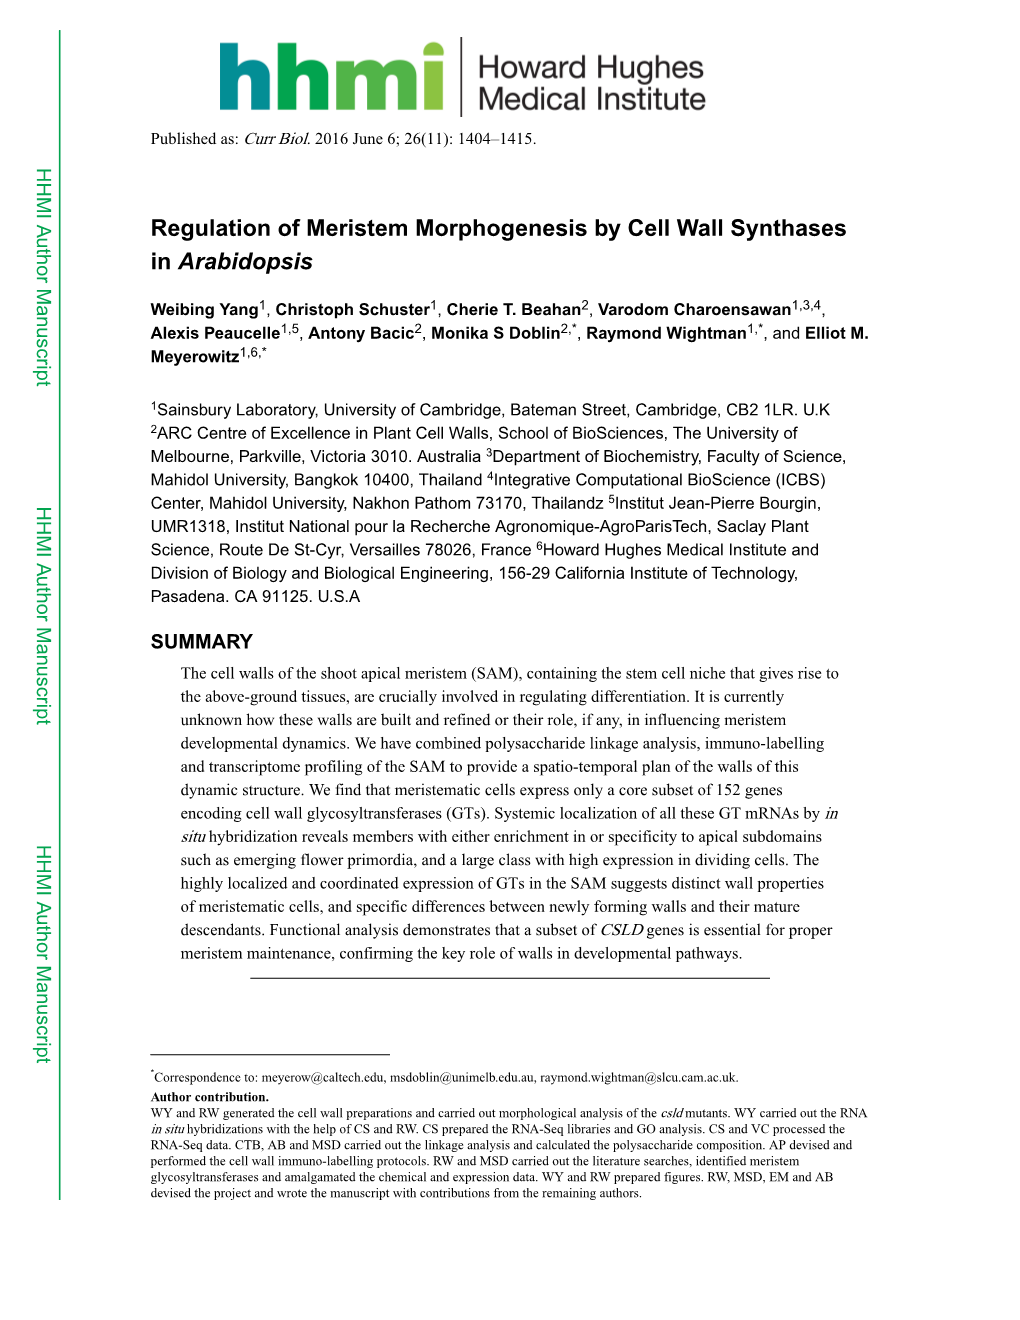 Regulation of Meristem Morphogenesis by Cell Wall Synthases in Arabidopsis